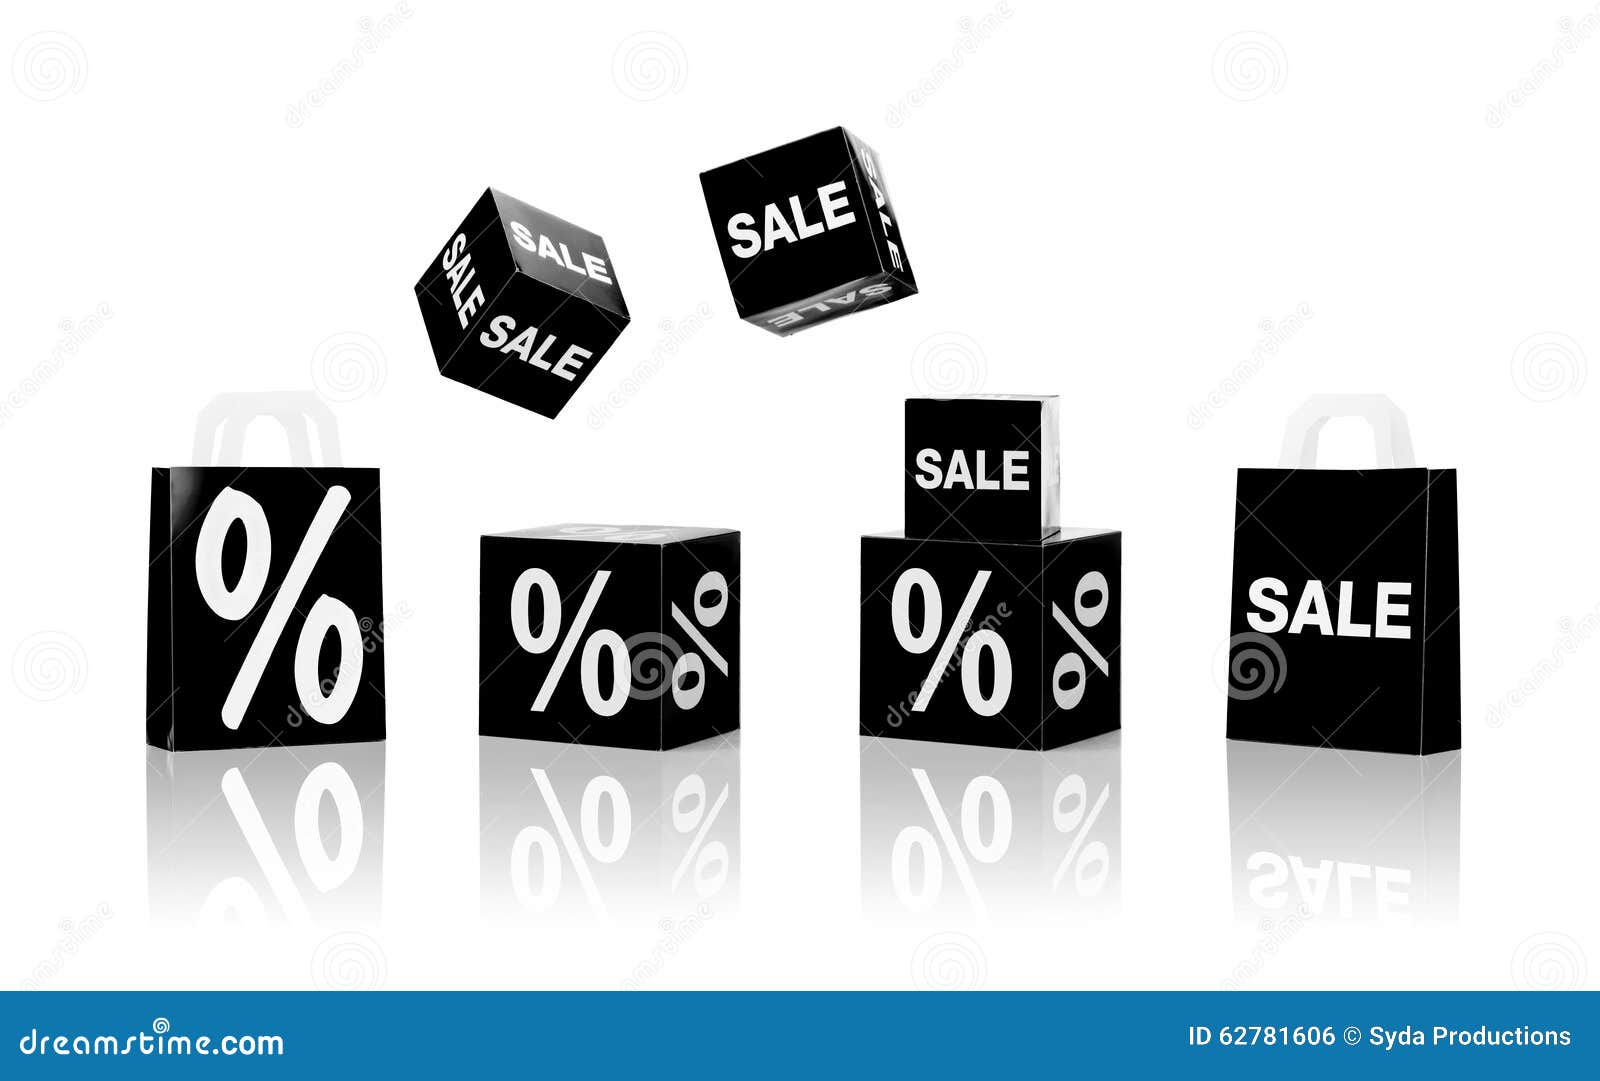 Shopping Bags And Sale Signs With Percent Stock Photo - Image: 62781606